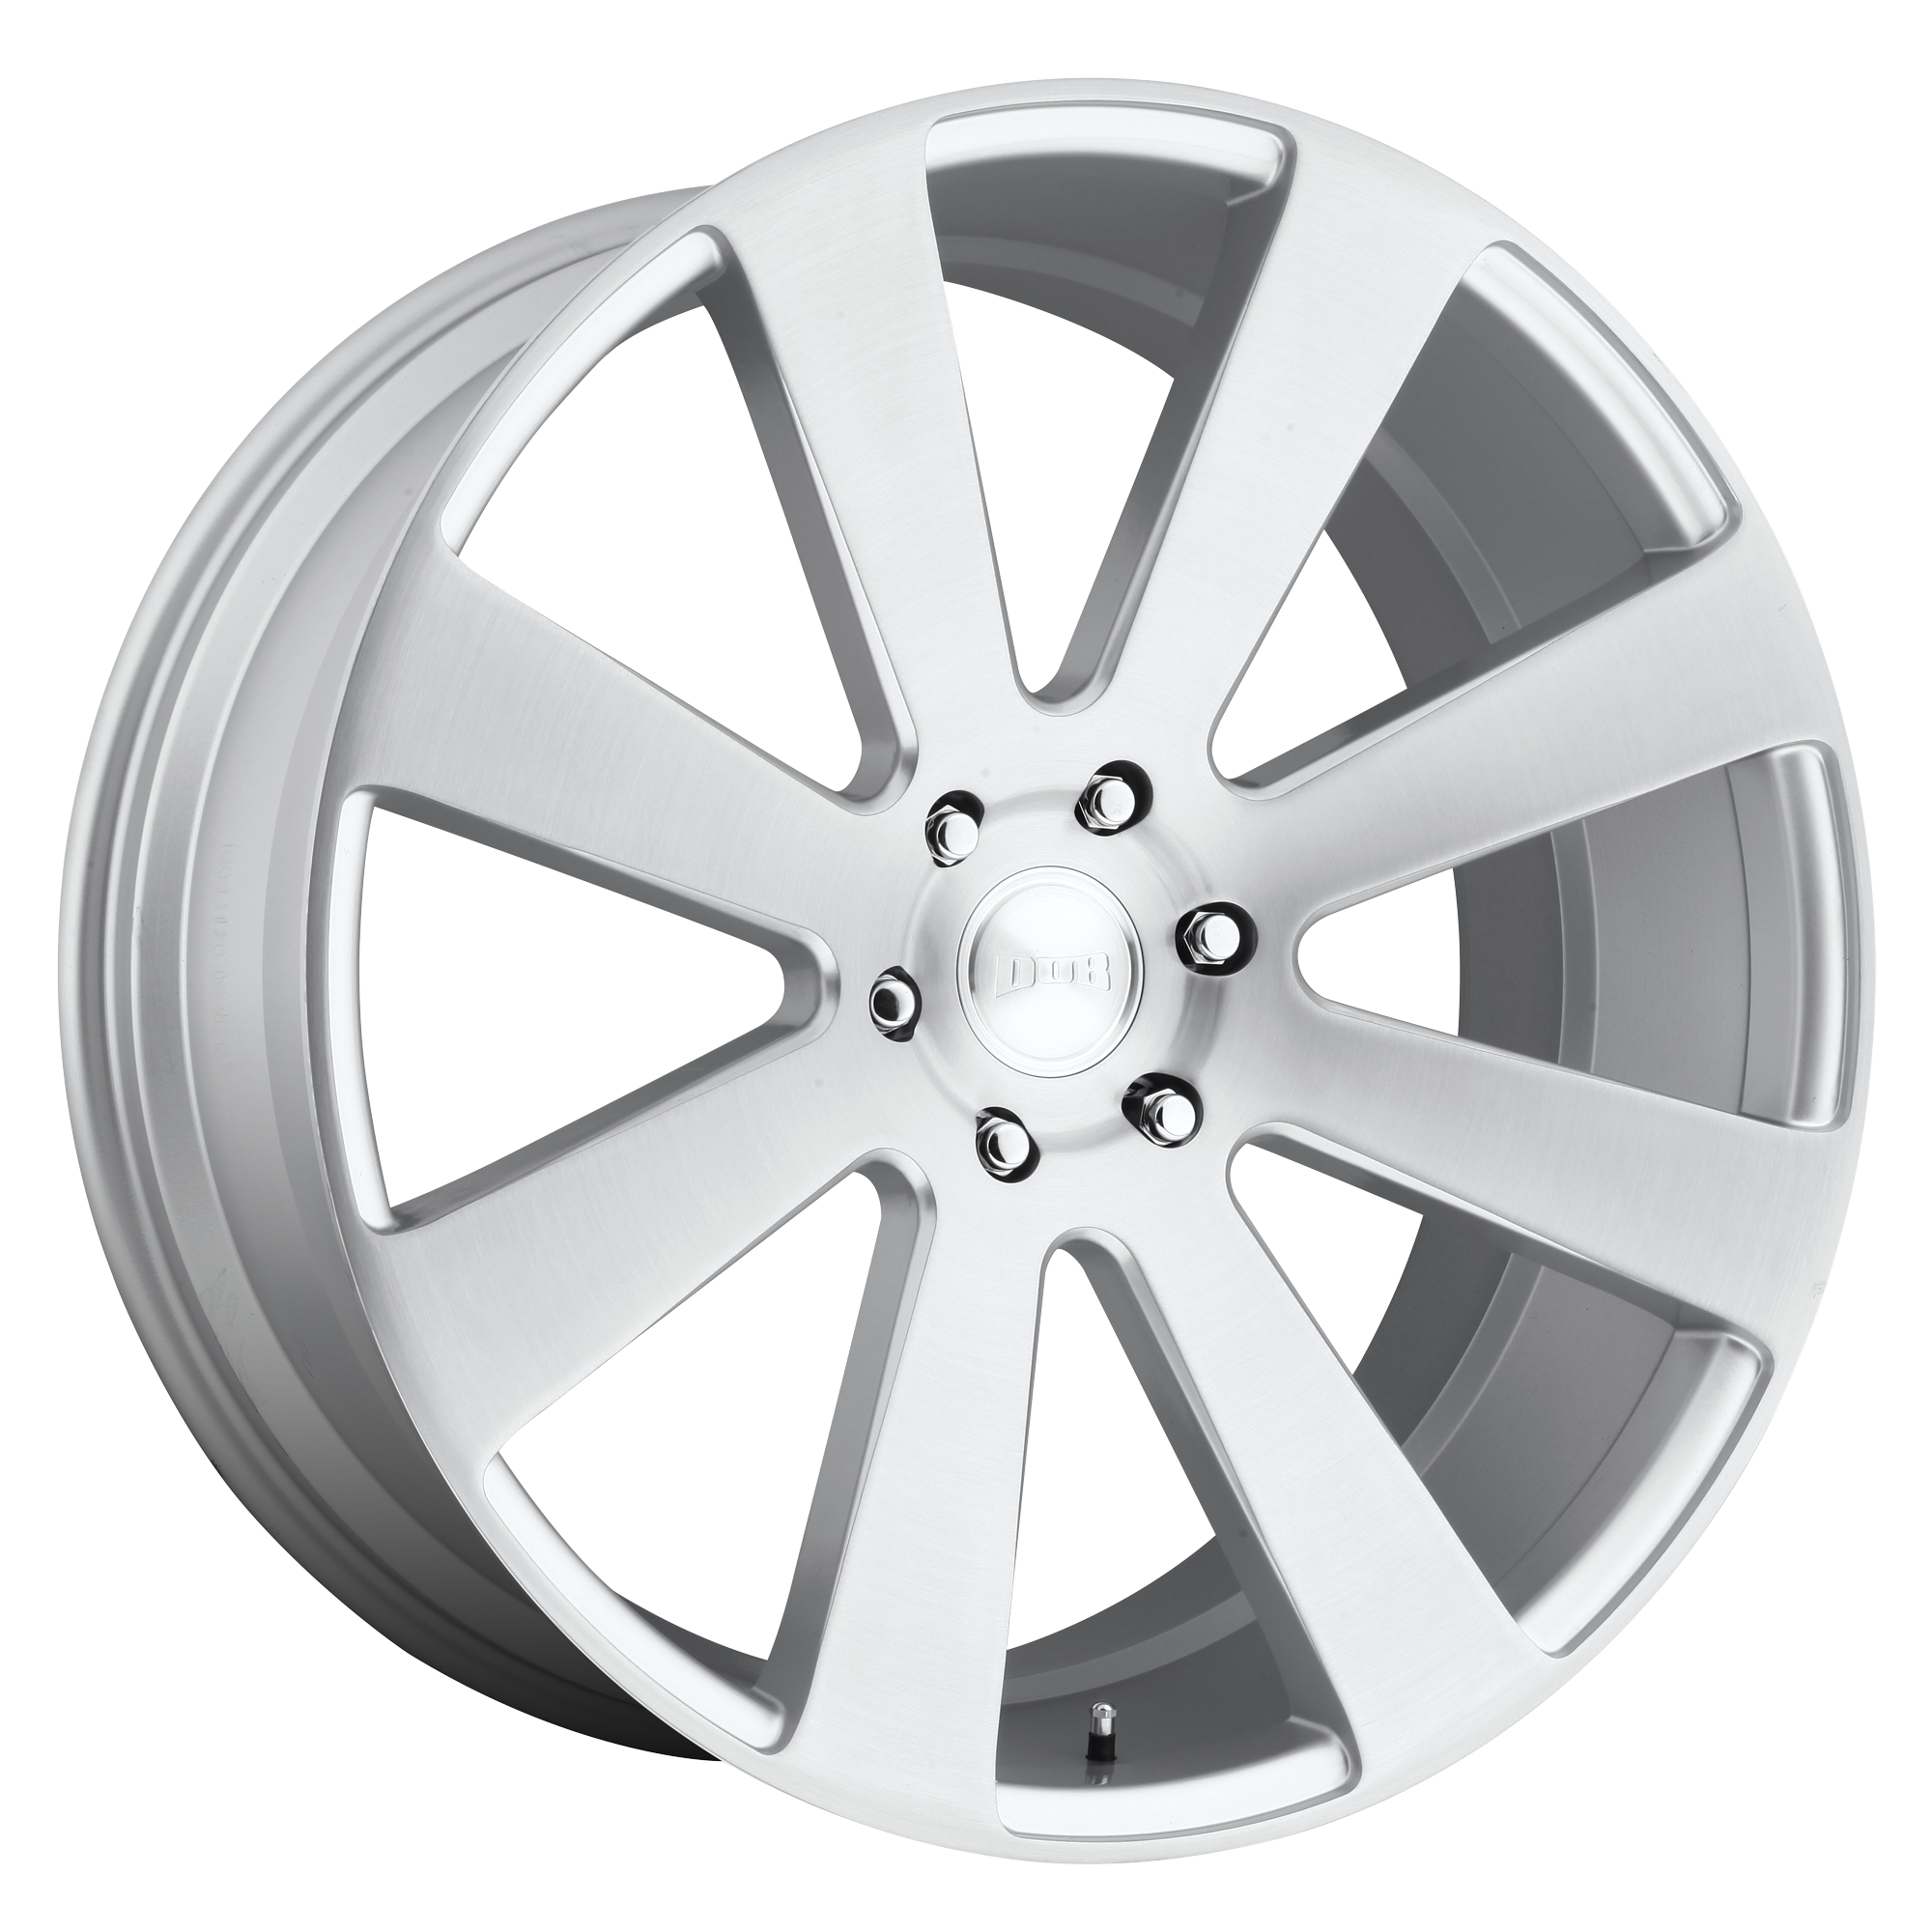 8-BALL 22x9.5 6x139.70 GLOSS SILVER BRUSHED (20 mm) - Tires and Engine Performance